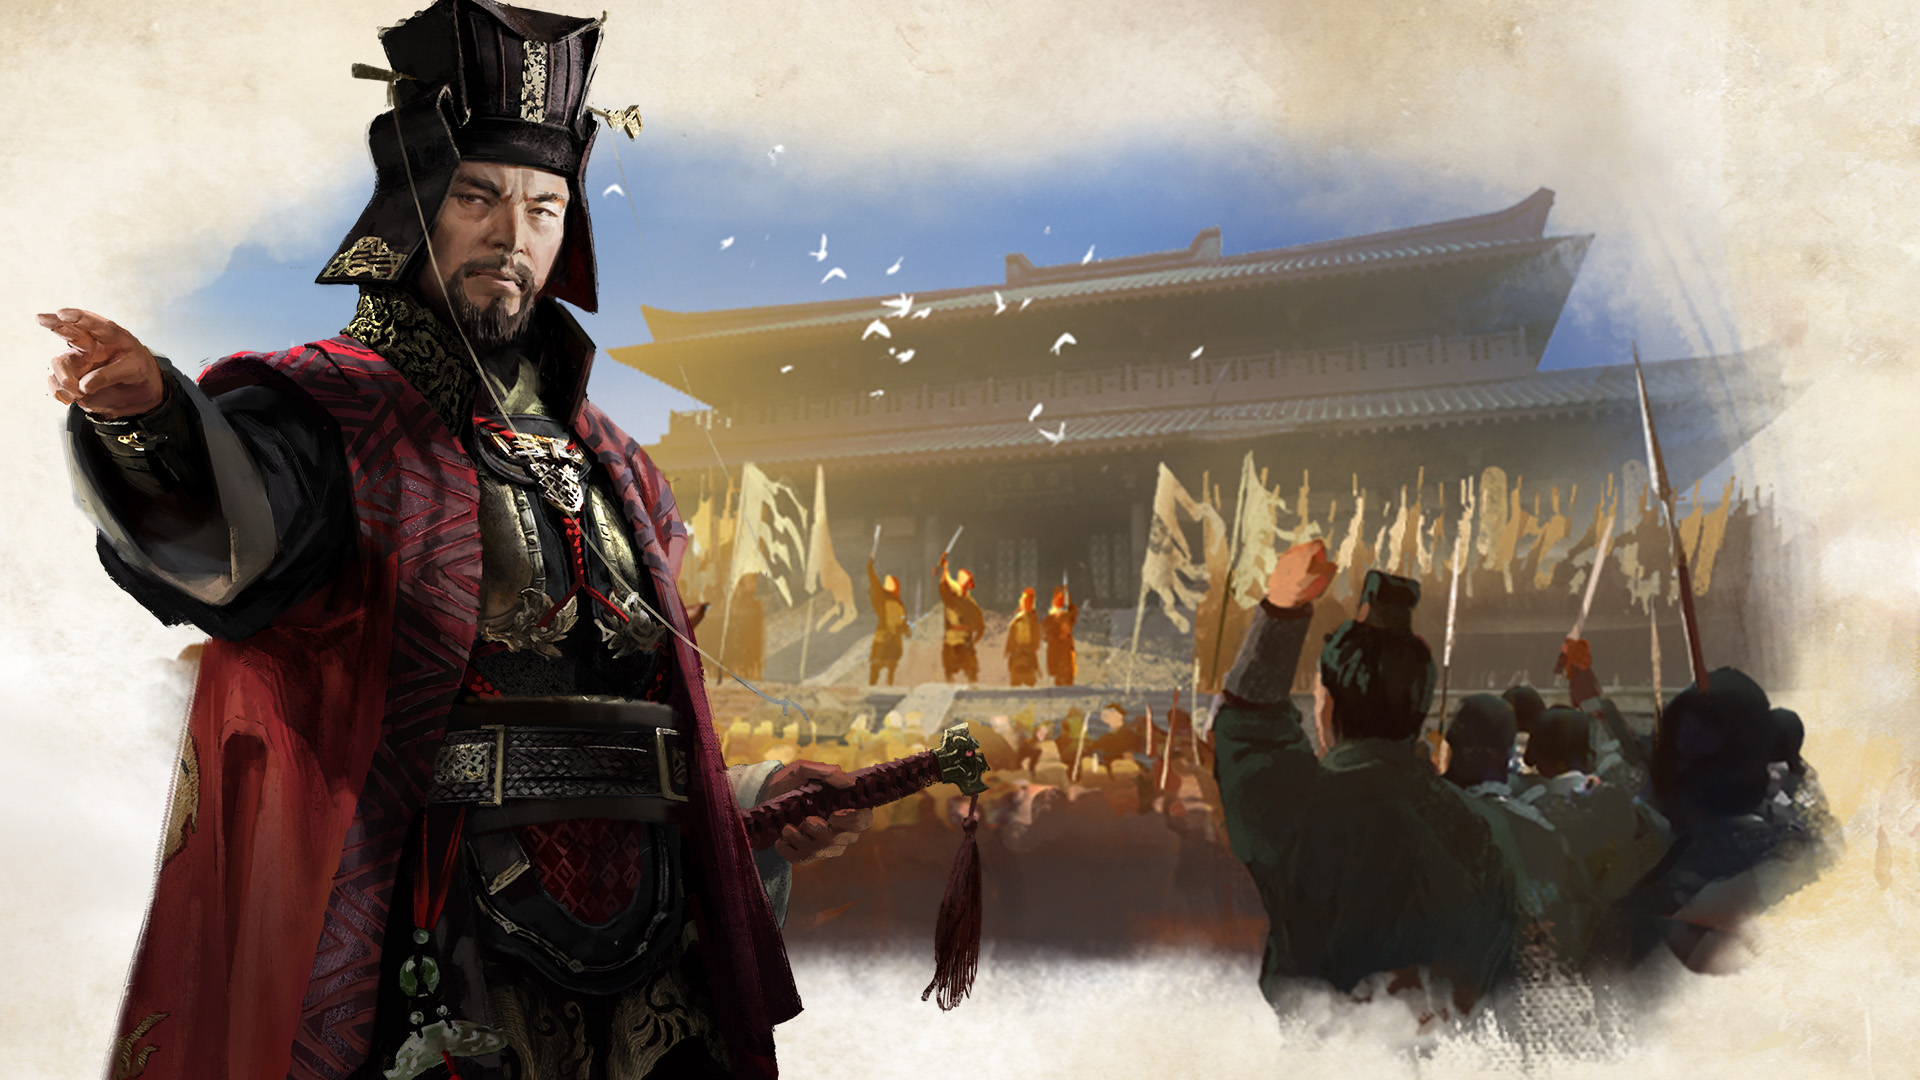 download tob total war for free